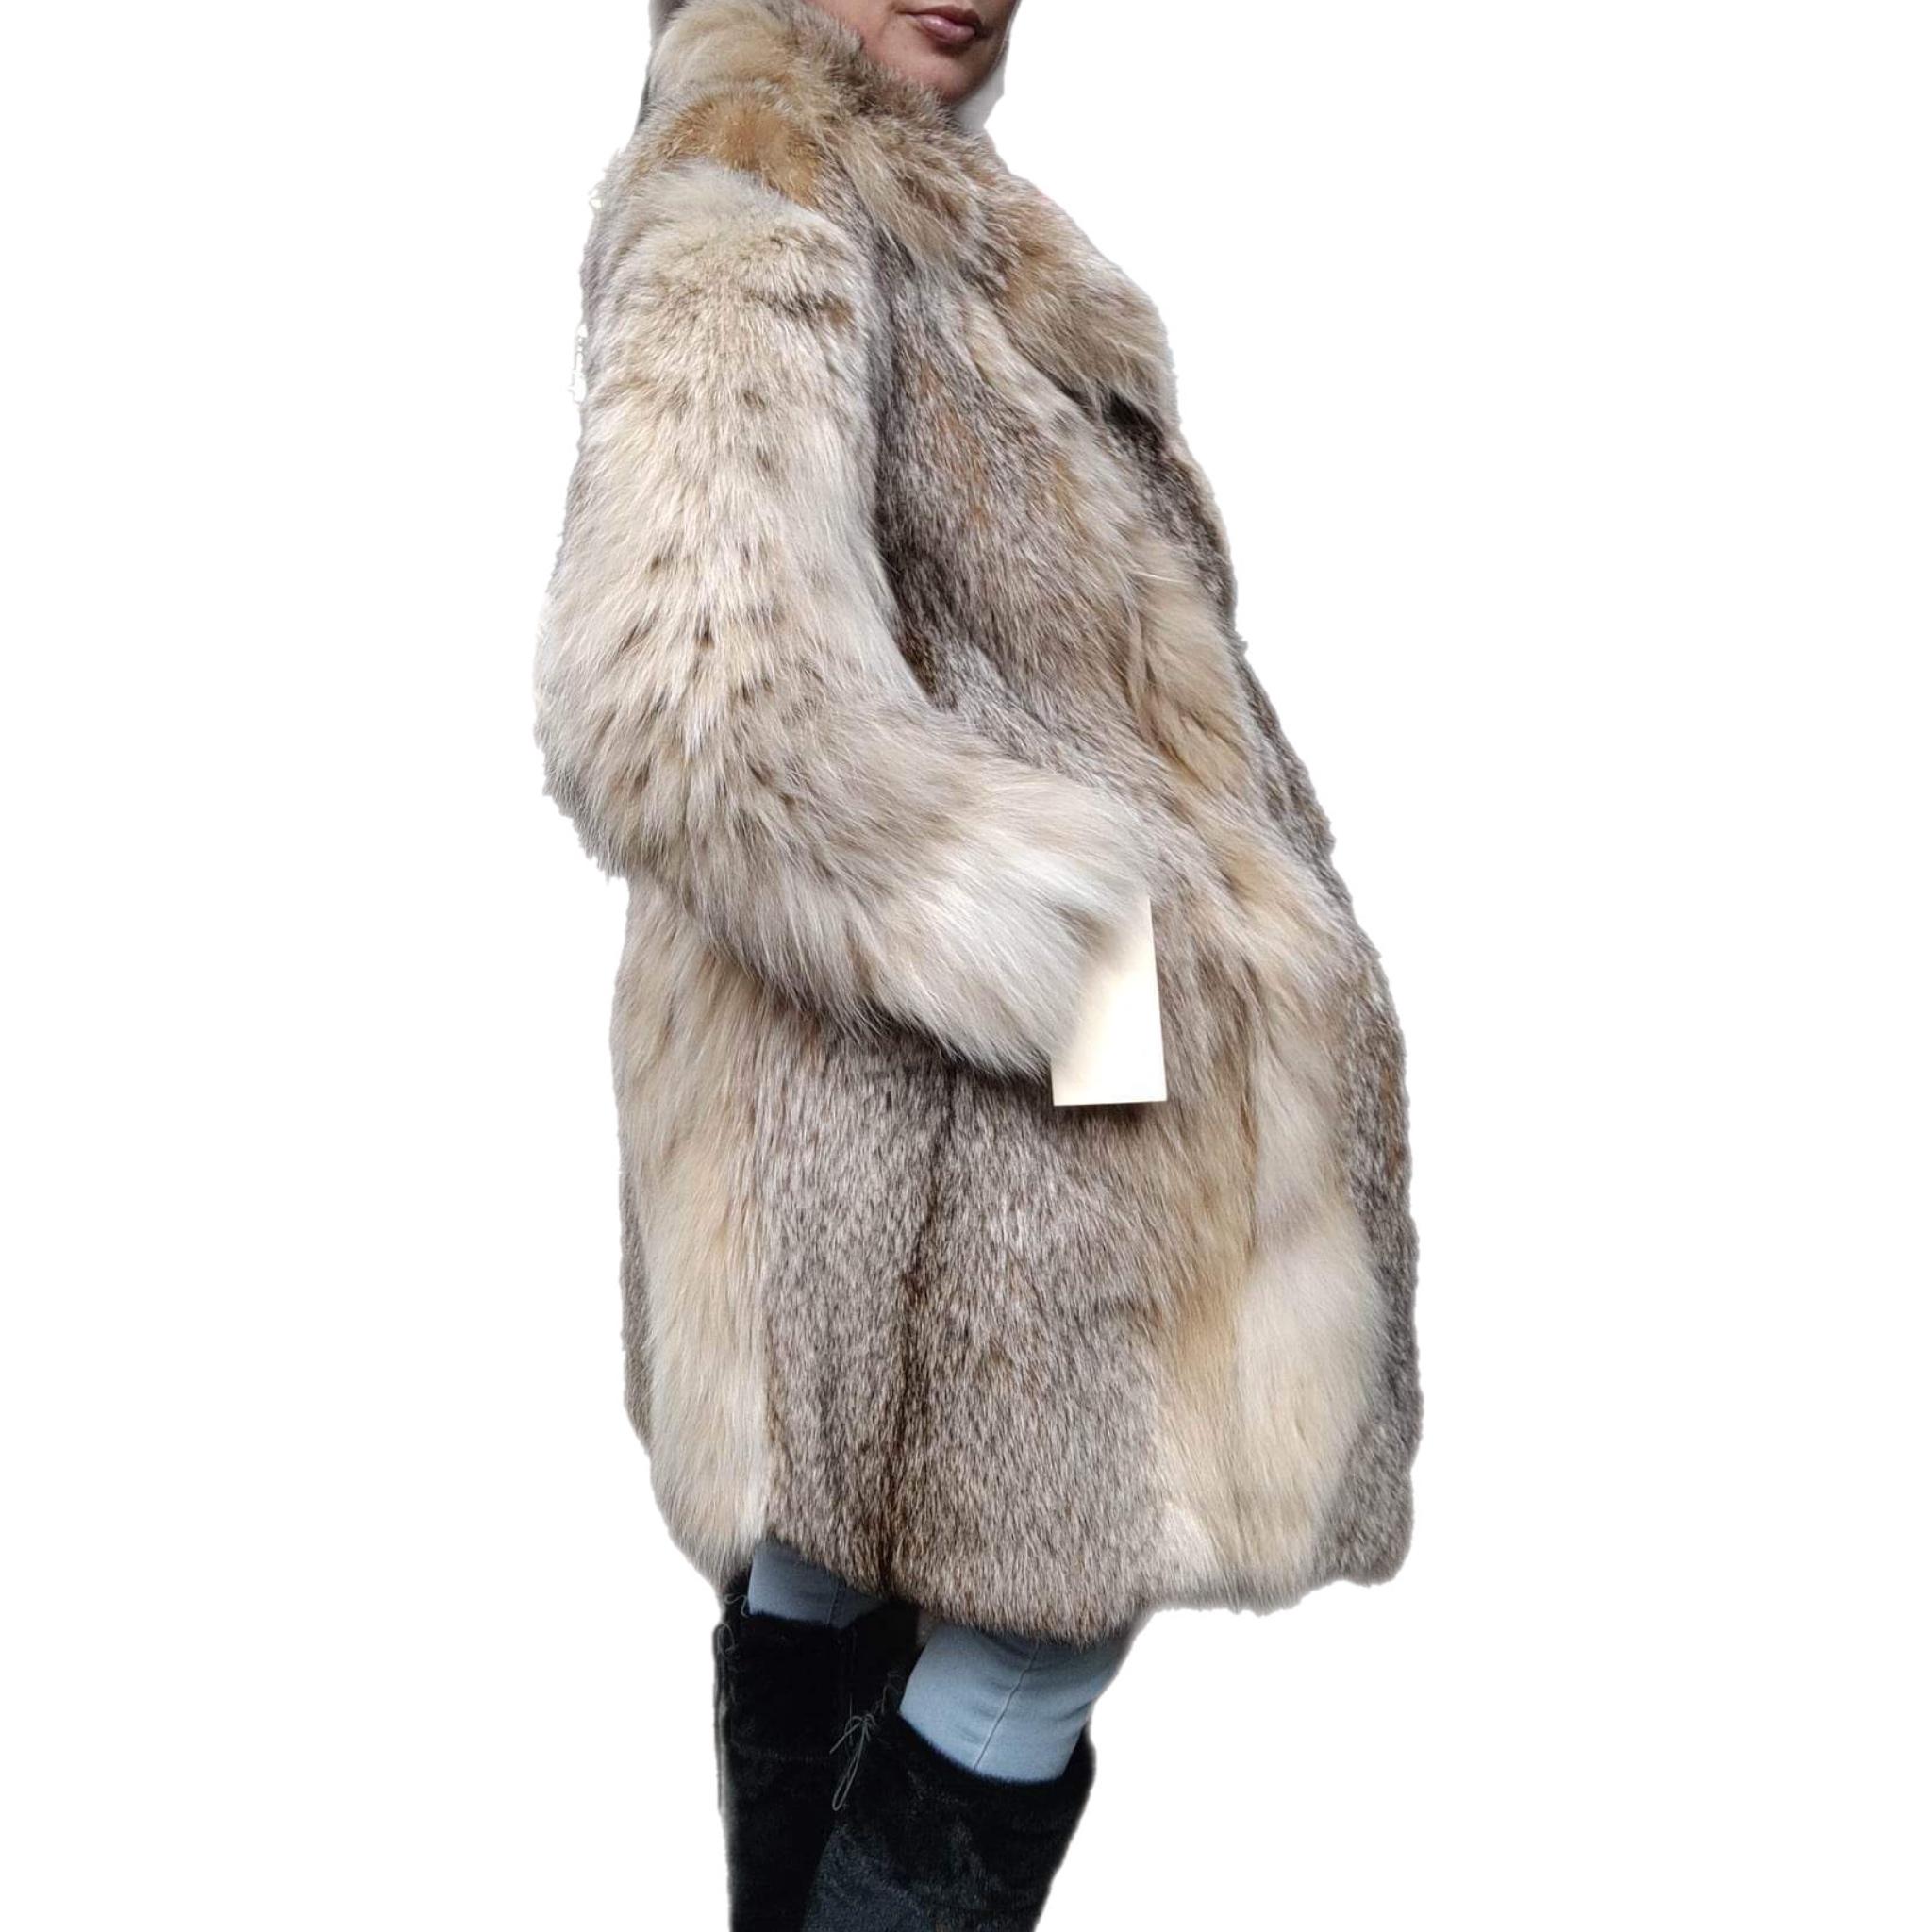 DESCRIPTION : Brand new Canadian lynx fur coat size 8 S
Stock 402

Tailored collar, straight sleeves, supple skins, beautiful fresh fur, european german clasps for closure, too slit pockets, nice big full pelts skins in new equisite